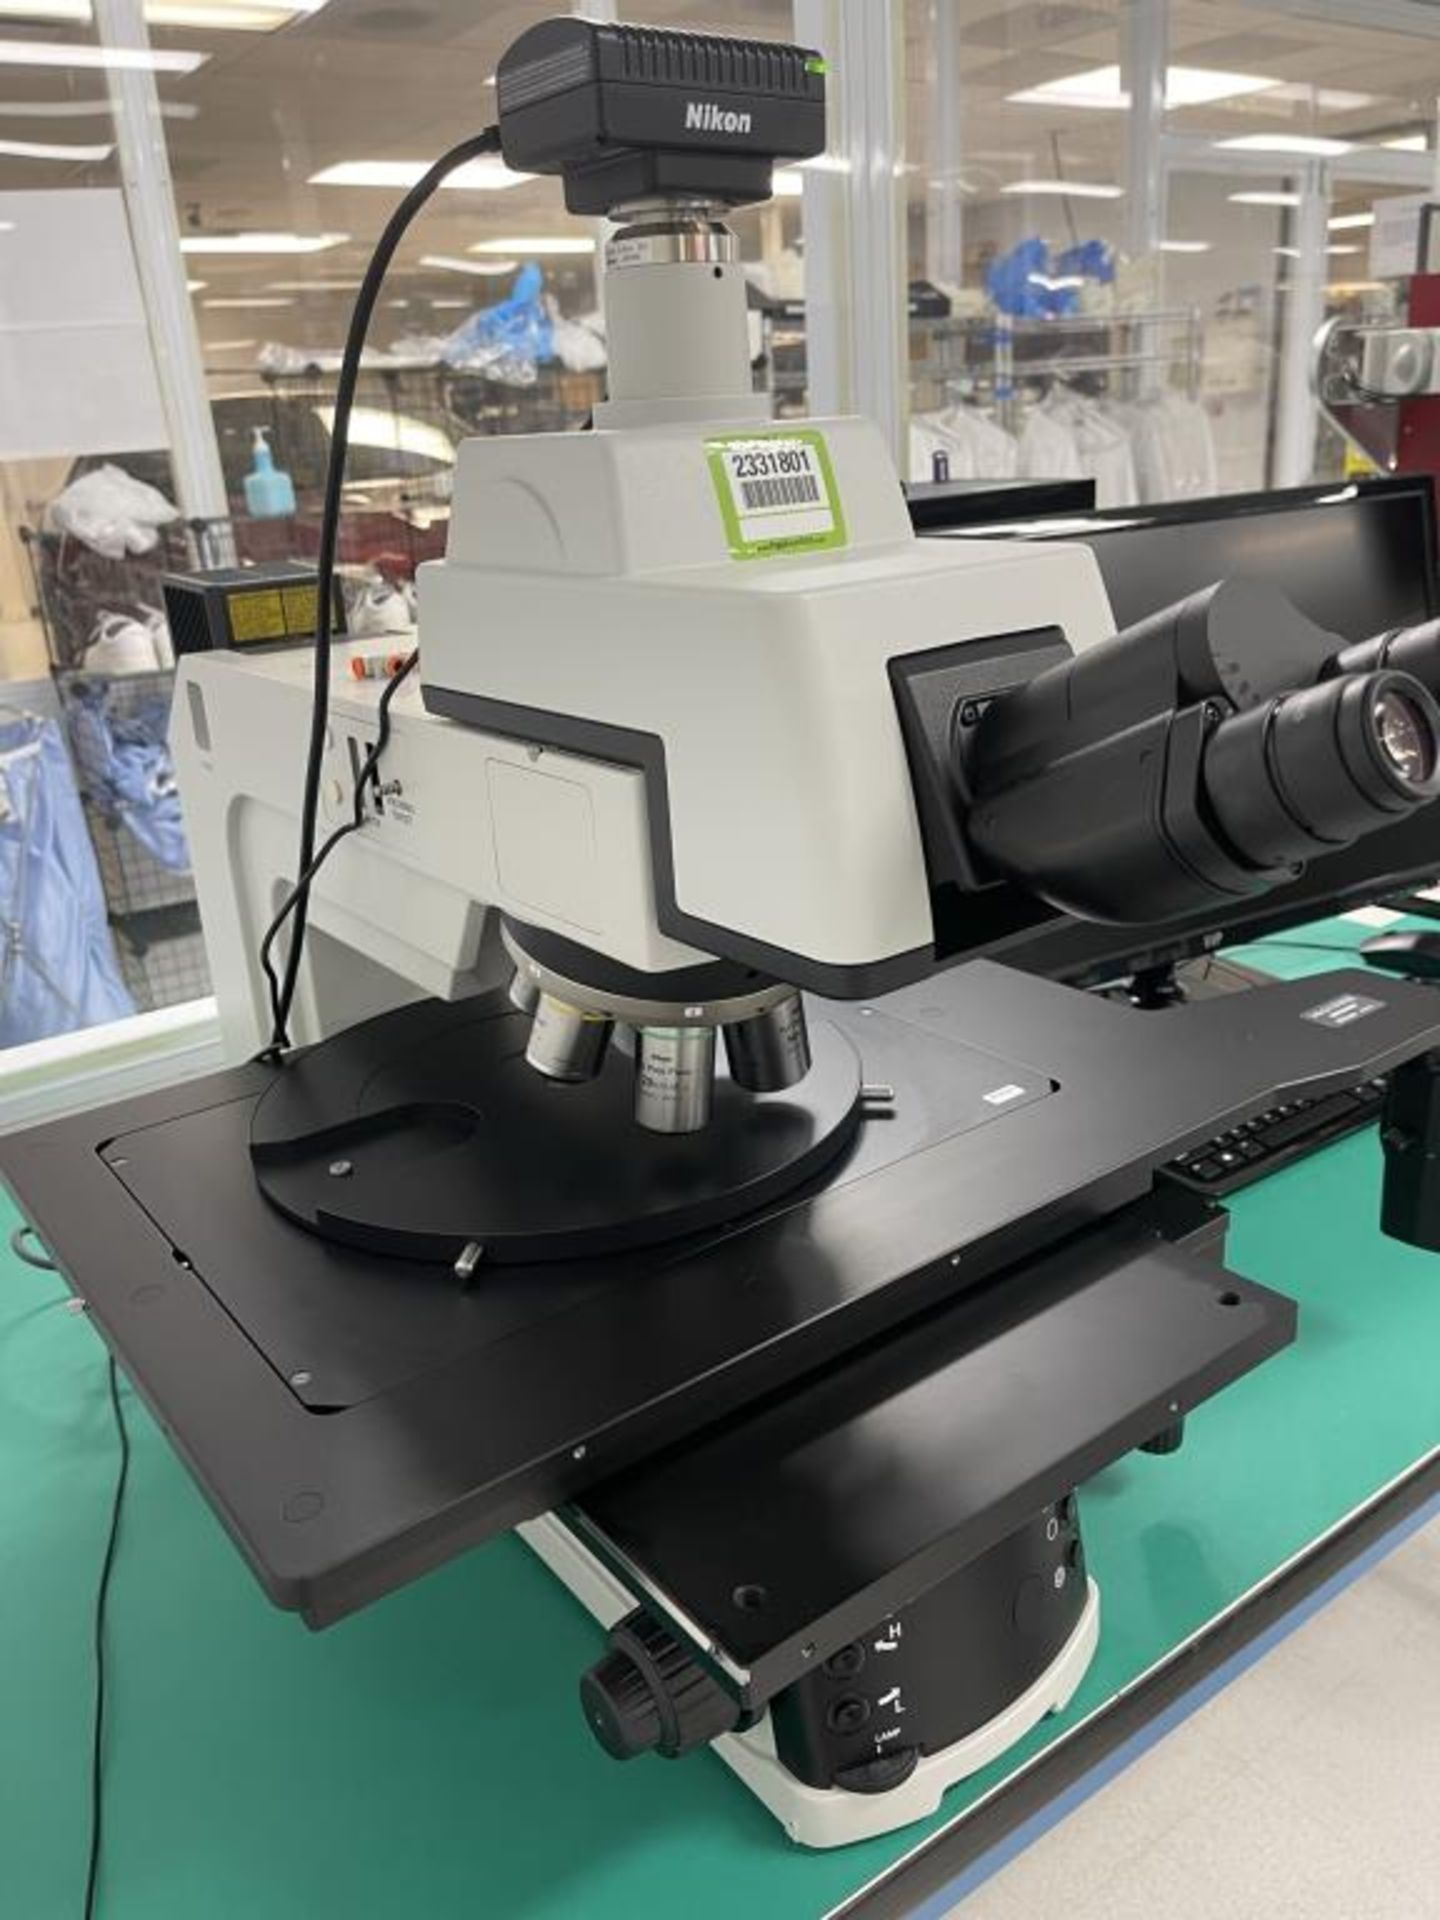 Nikon Wafer Inspection Microscope - Image 16 of 17